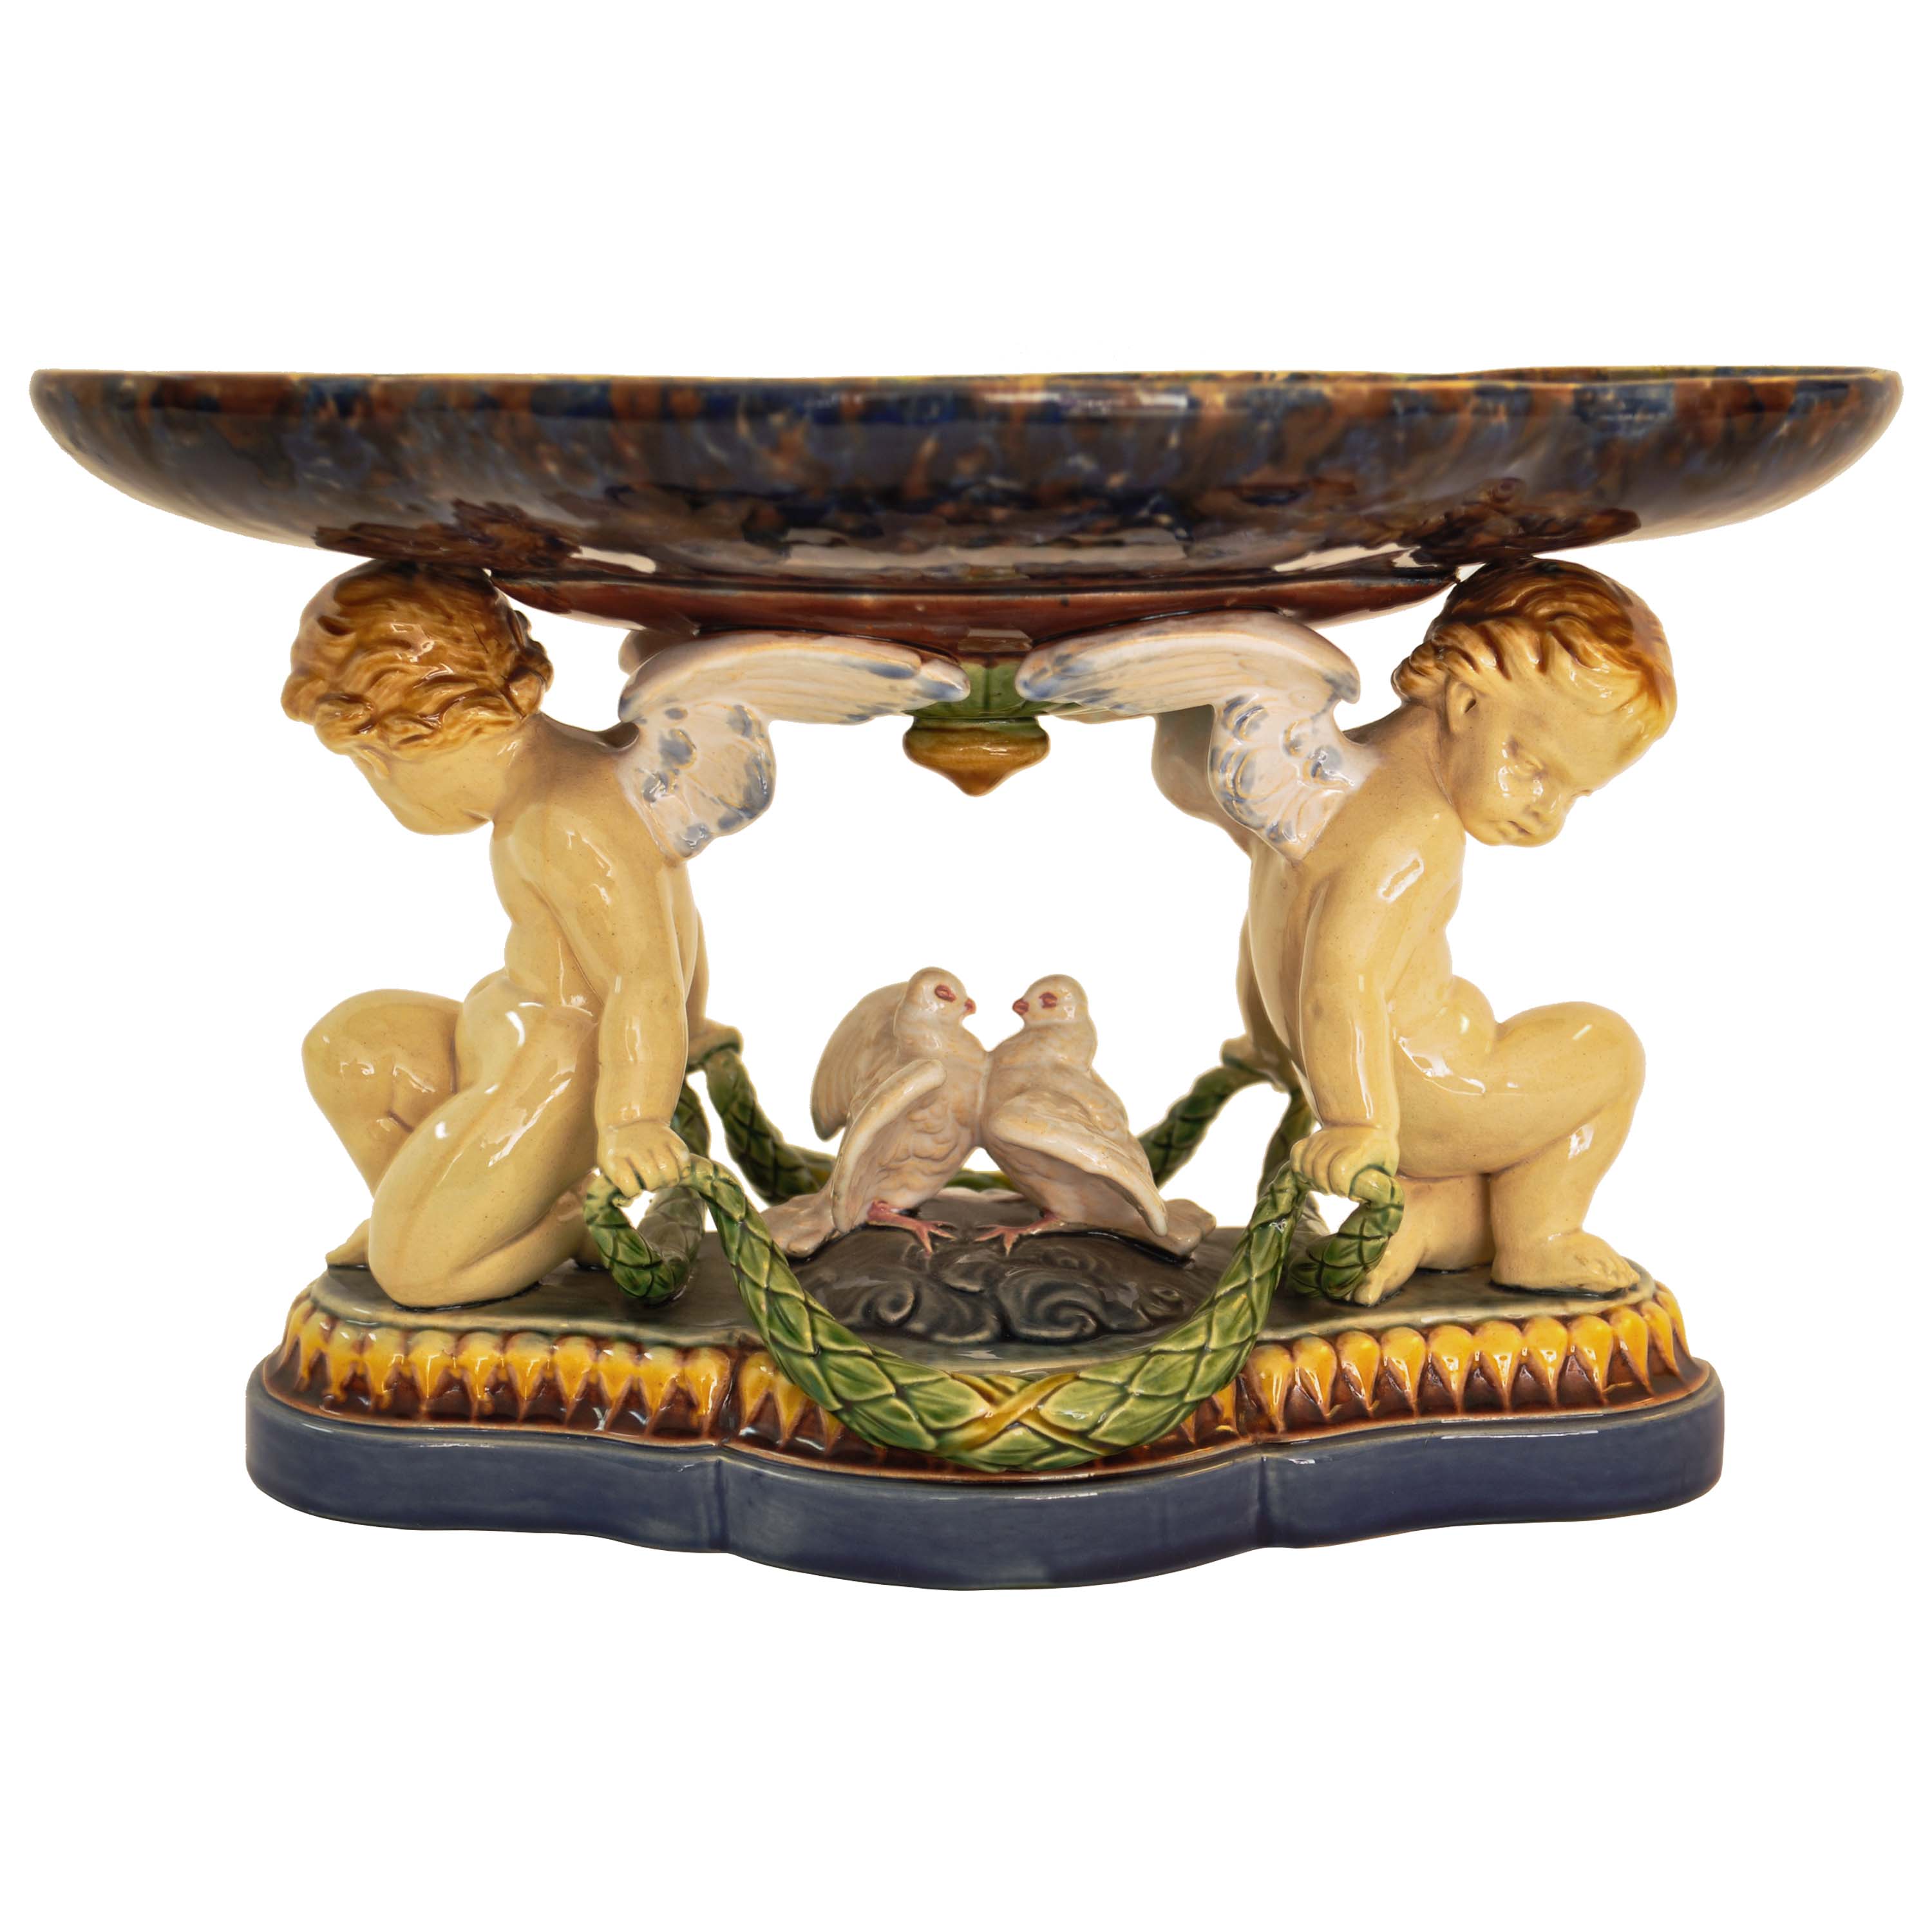 A good antique Minton Majolica centerpiece/tazza, 1861.
The centerpiece with a flanged shaped shallow dish supported with a pair of winged cherubs and a pair of nesting doves and raised on a stepped plinth. The centerpiece having typical Minton